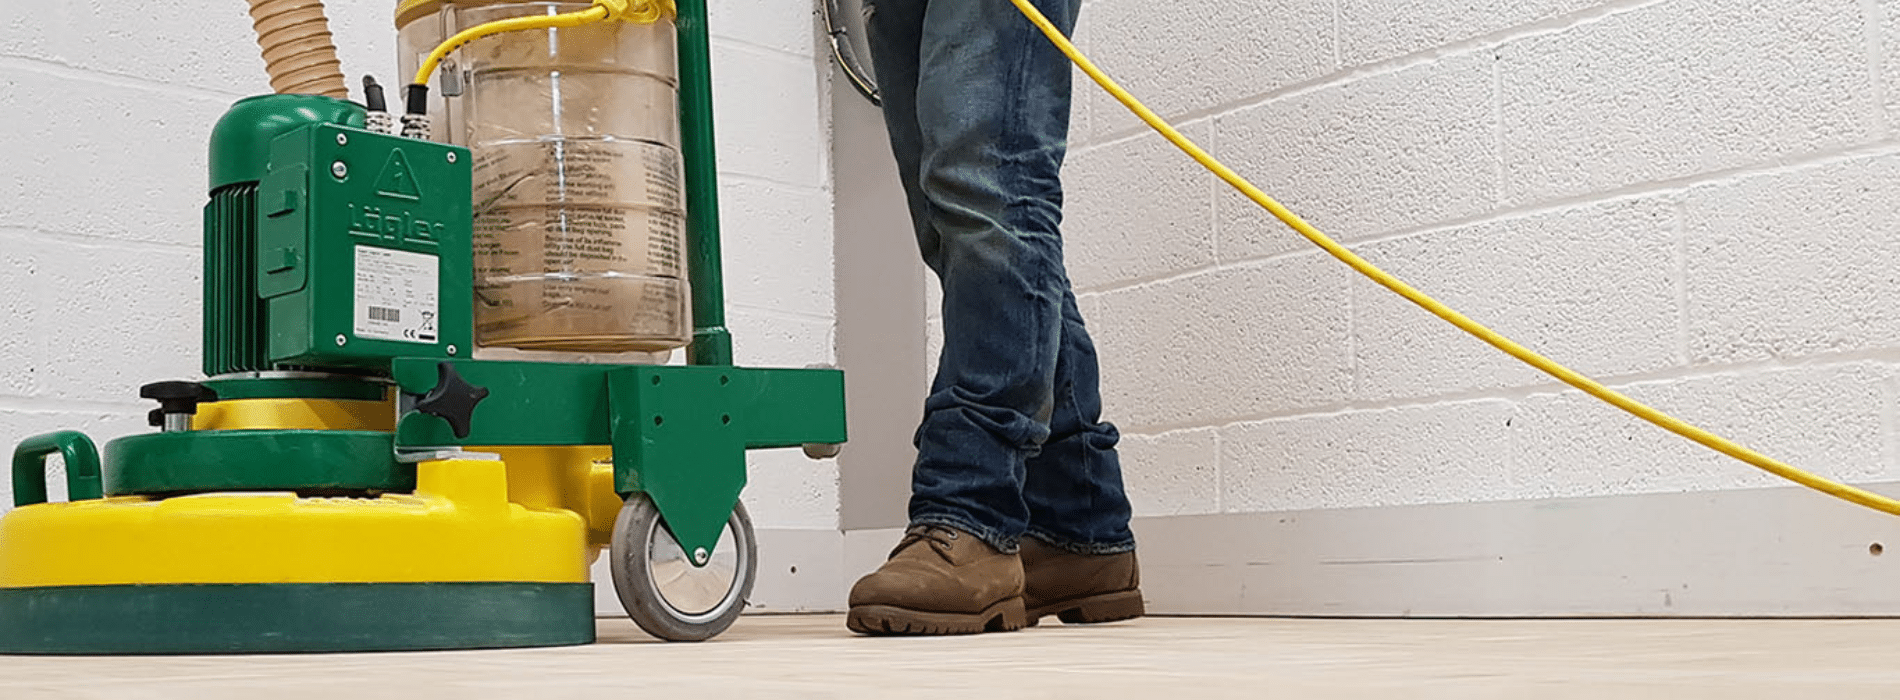 In Keston, BR2, Mr Sander® use the Bona FlexiSand 1.9, a powerful buffer sander (Ø 407 mm) with 1.9 kW effect, 230 V voltage, and 50 Hz/60 Hz frequency. It is connected to a dust extraction system equipped with a HEPA filter, ensuring a clean and efficient sanding process for parquet floors.